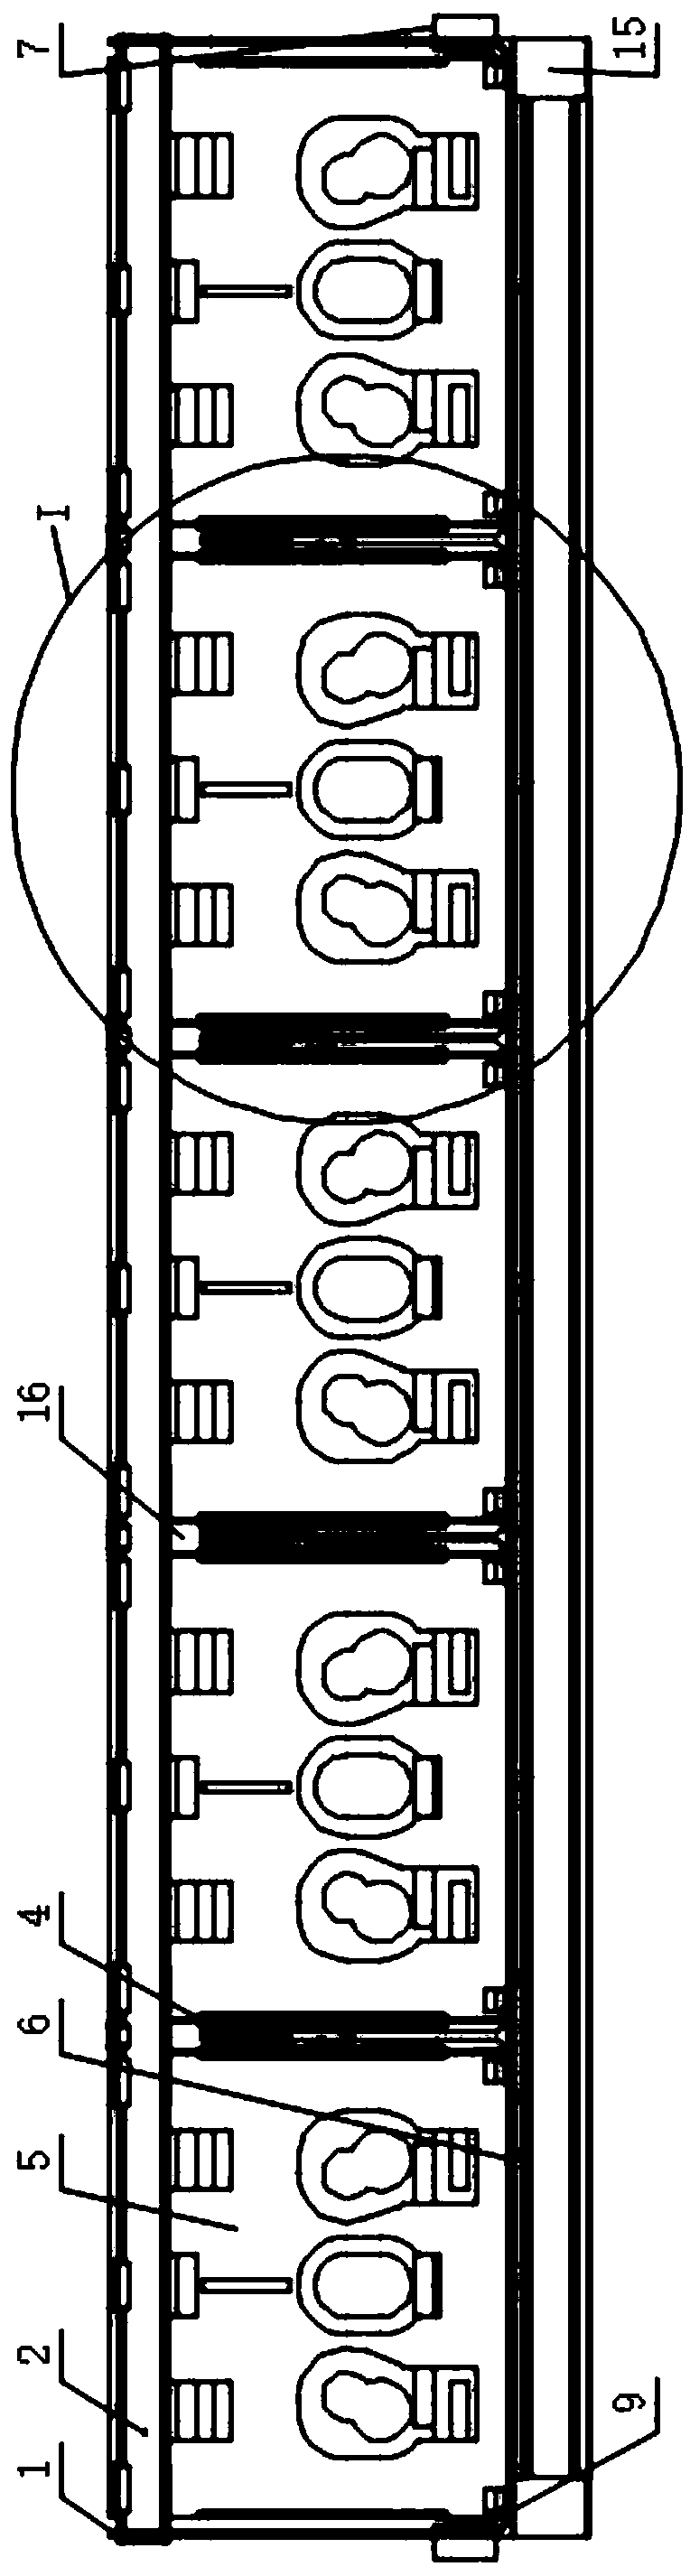 Goods chamber structure of vending machine